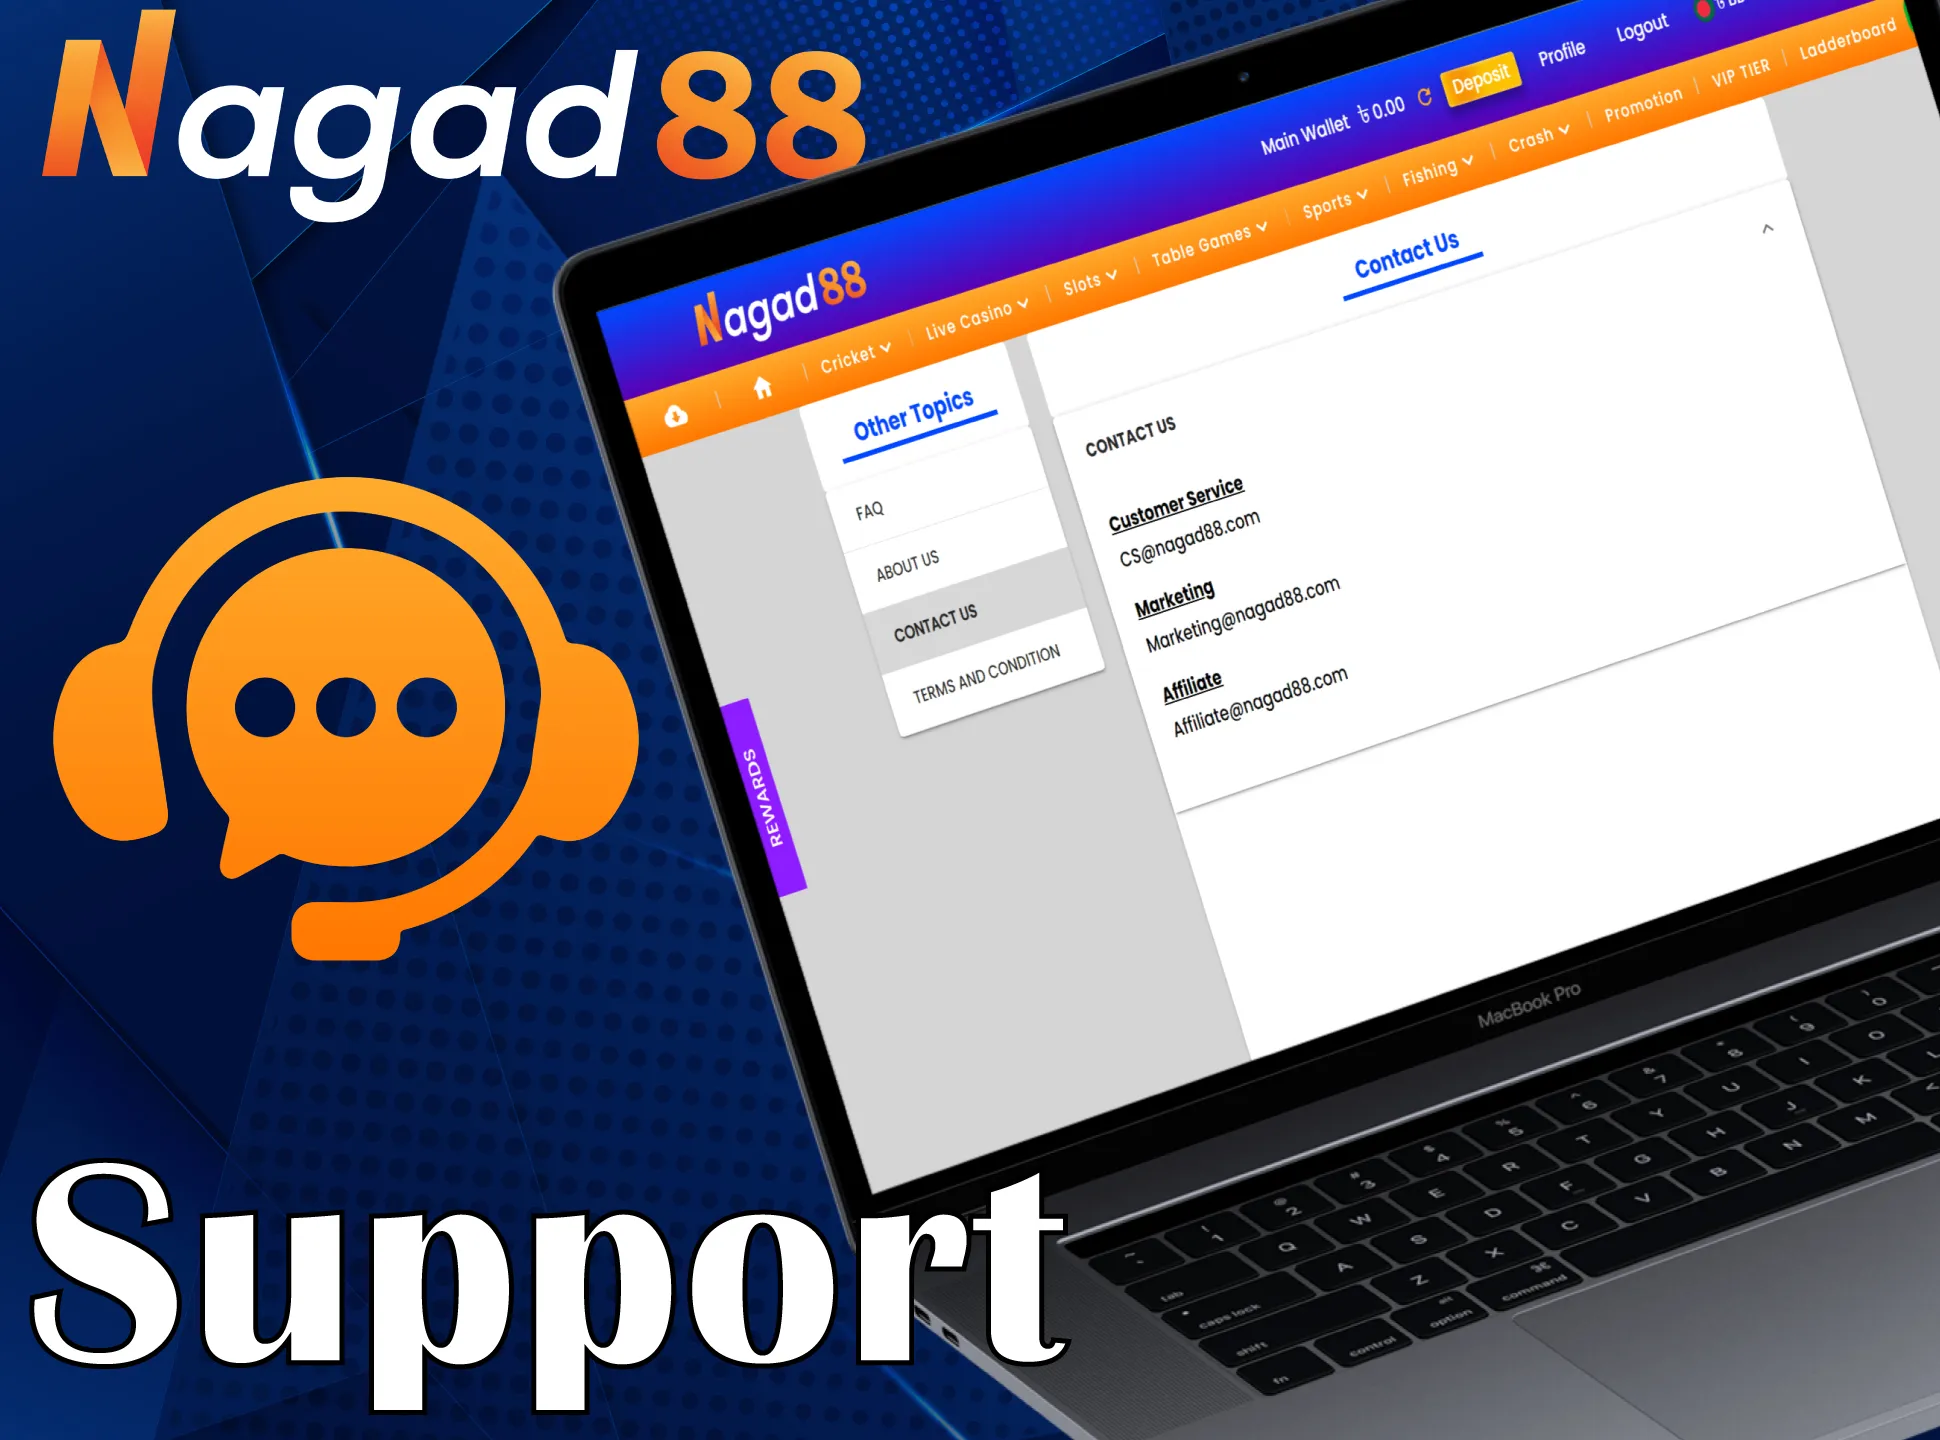 Nagad88 always supports its users.